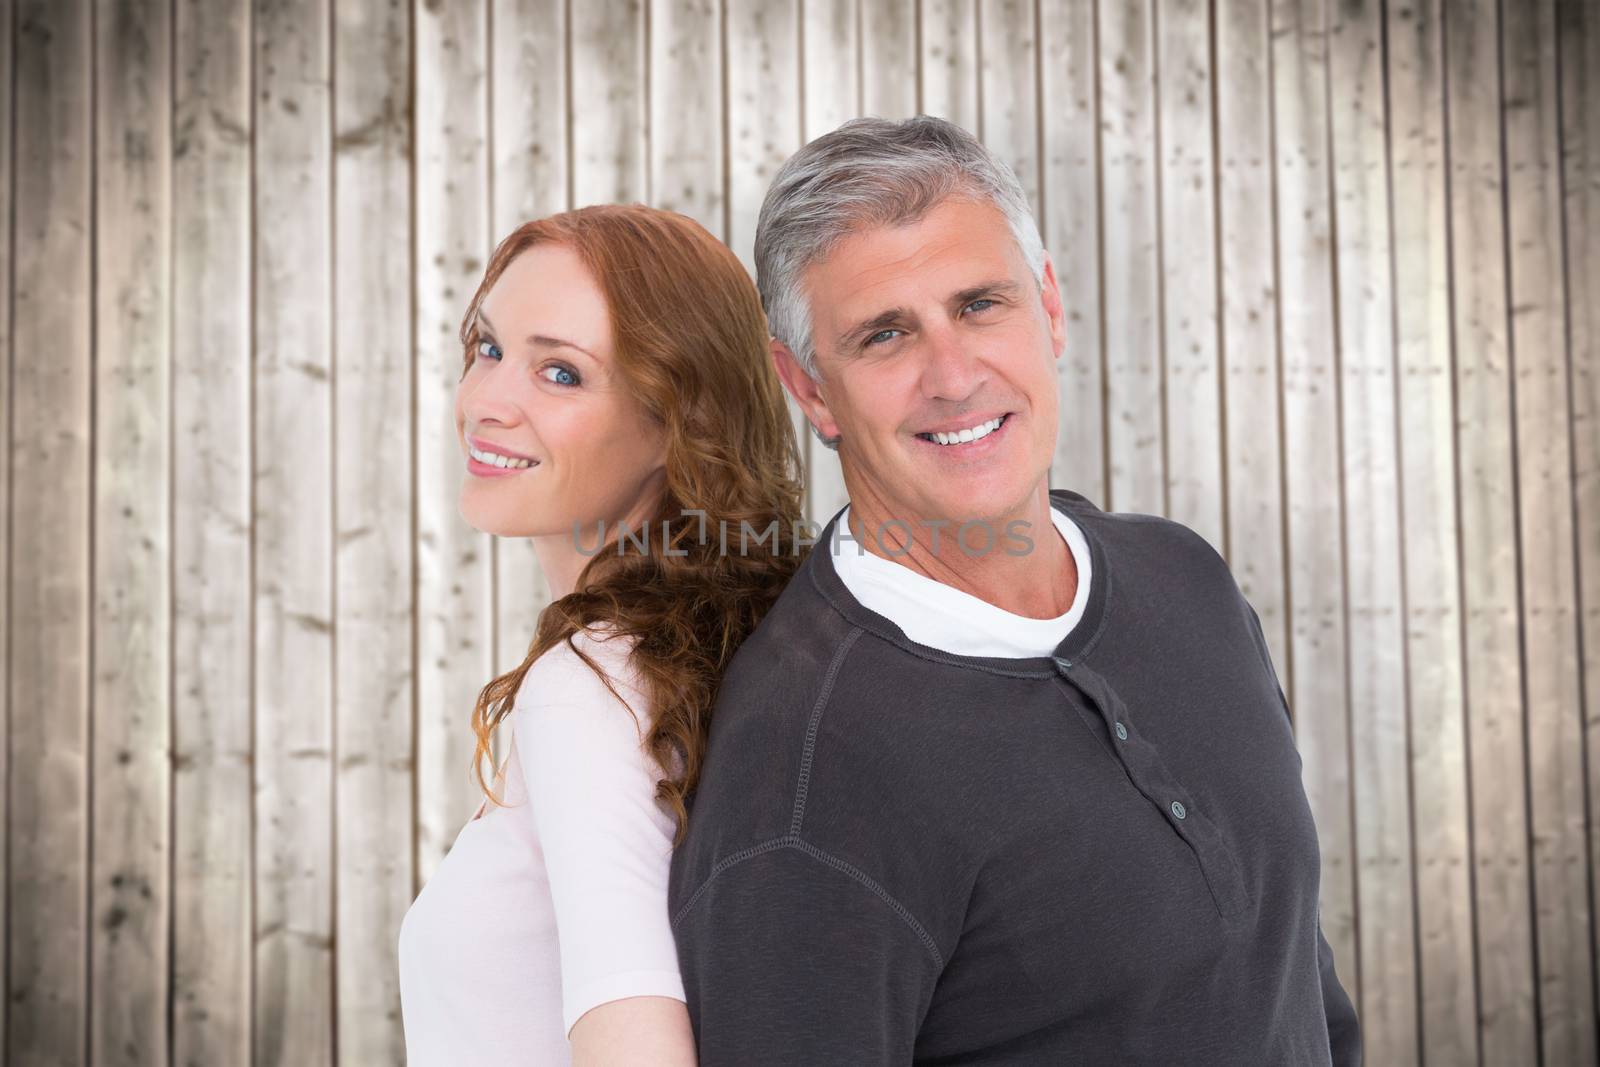 Casual couple smiling at camera against wooden planks background